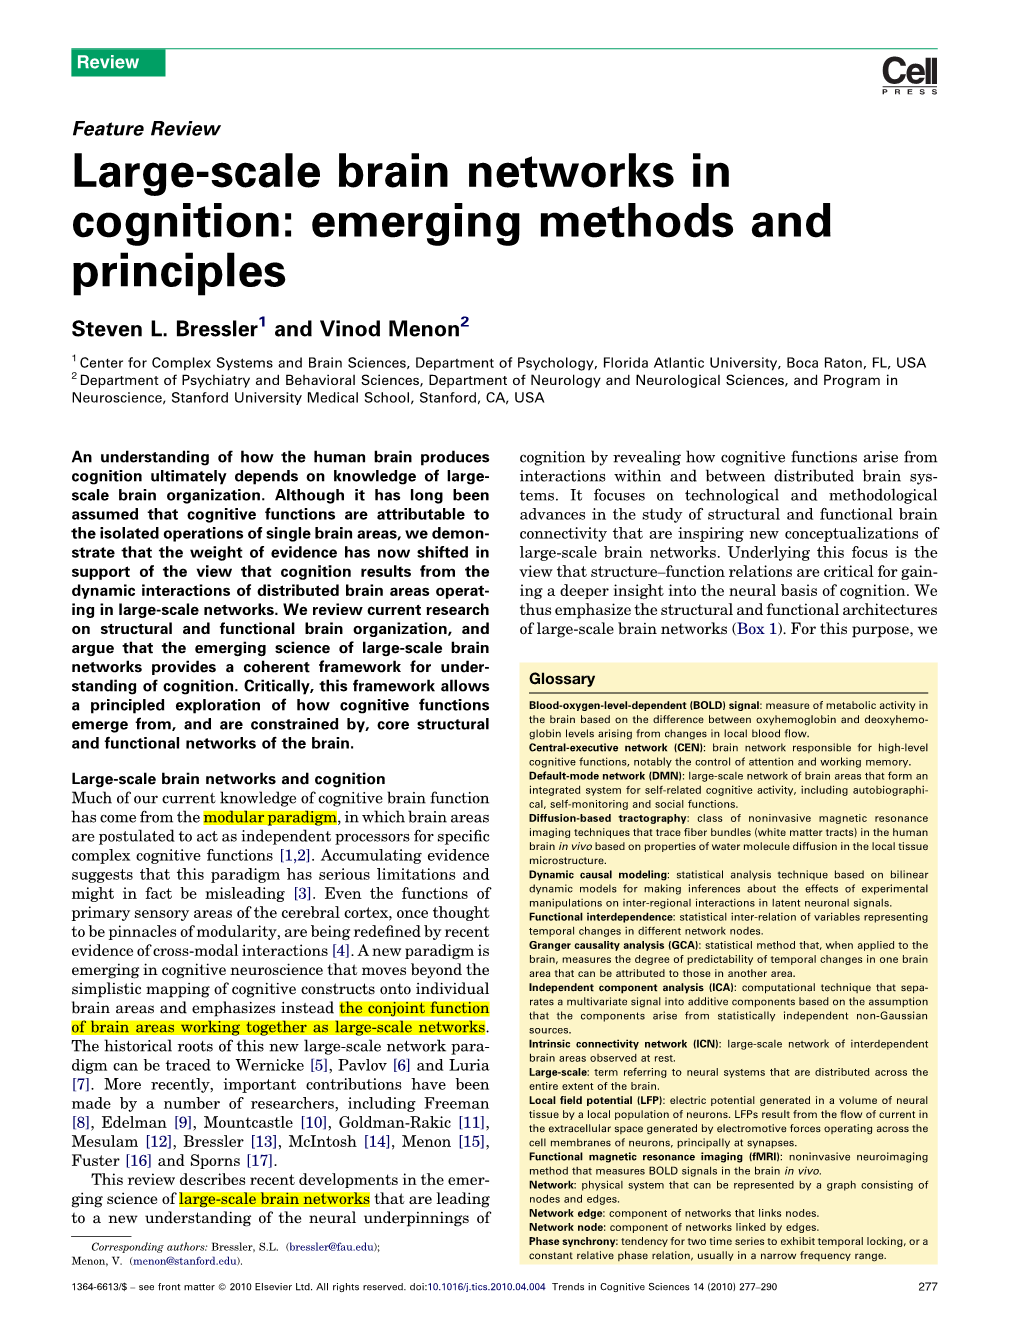 Large-Scale Brain Networks in Cognition: Emerging Methods and Principles